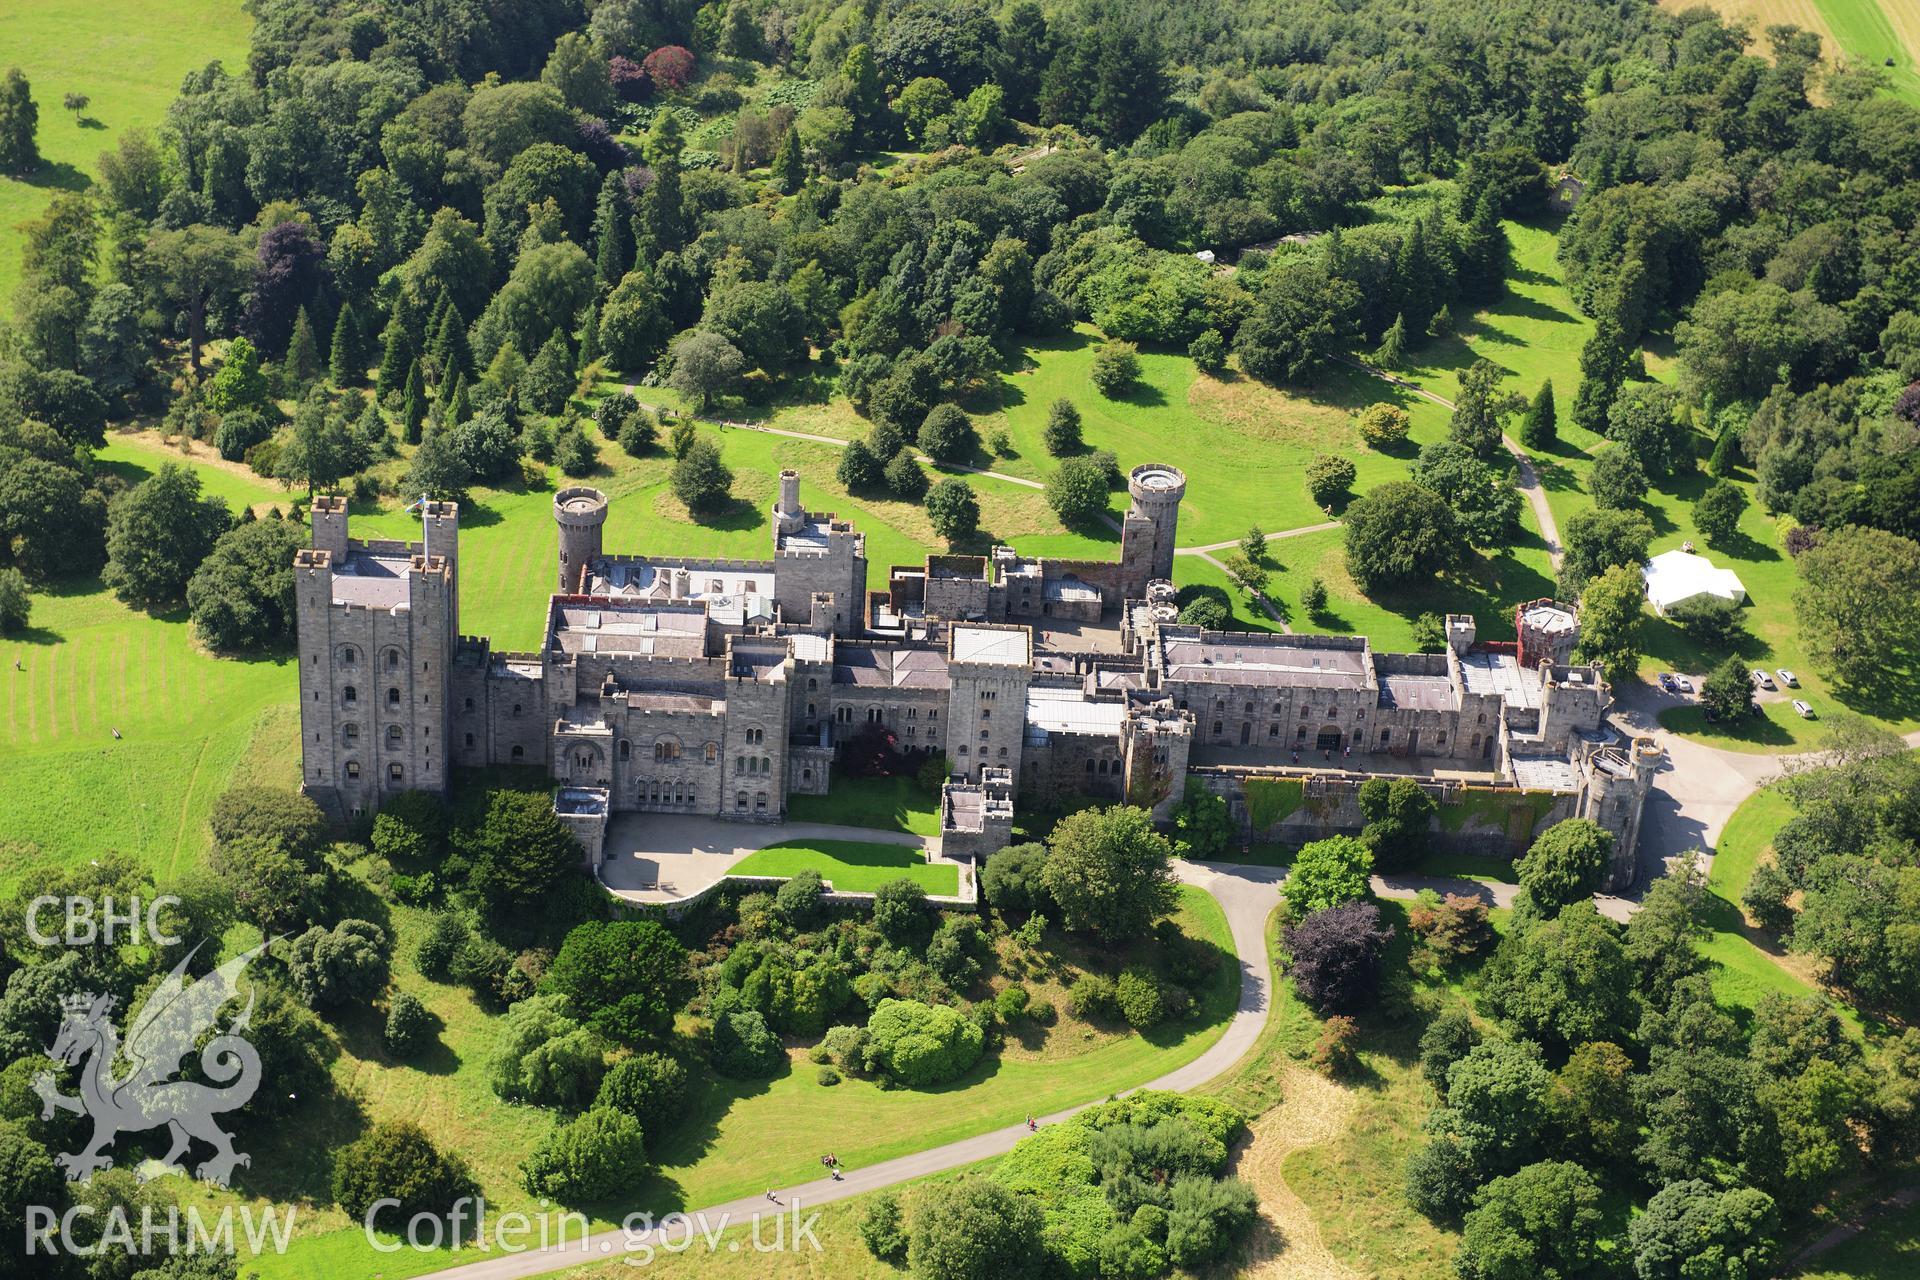 RCAHMW colour oblique photograph of Penrhyn Castle, viewed from the east. Taken by Toby Driver on 10/08/2012.